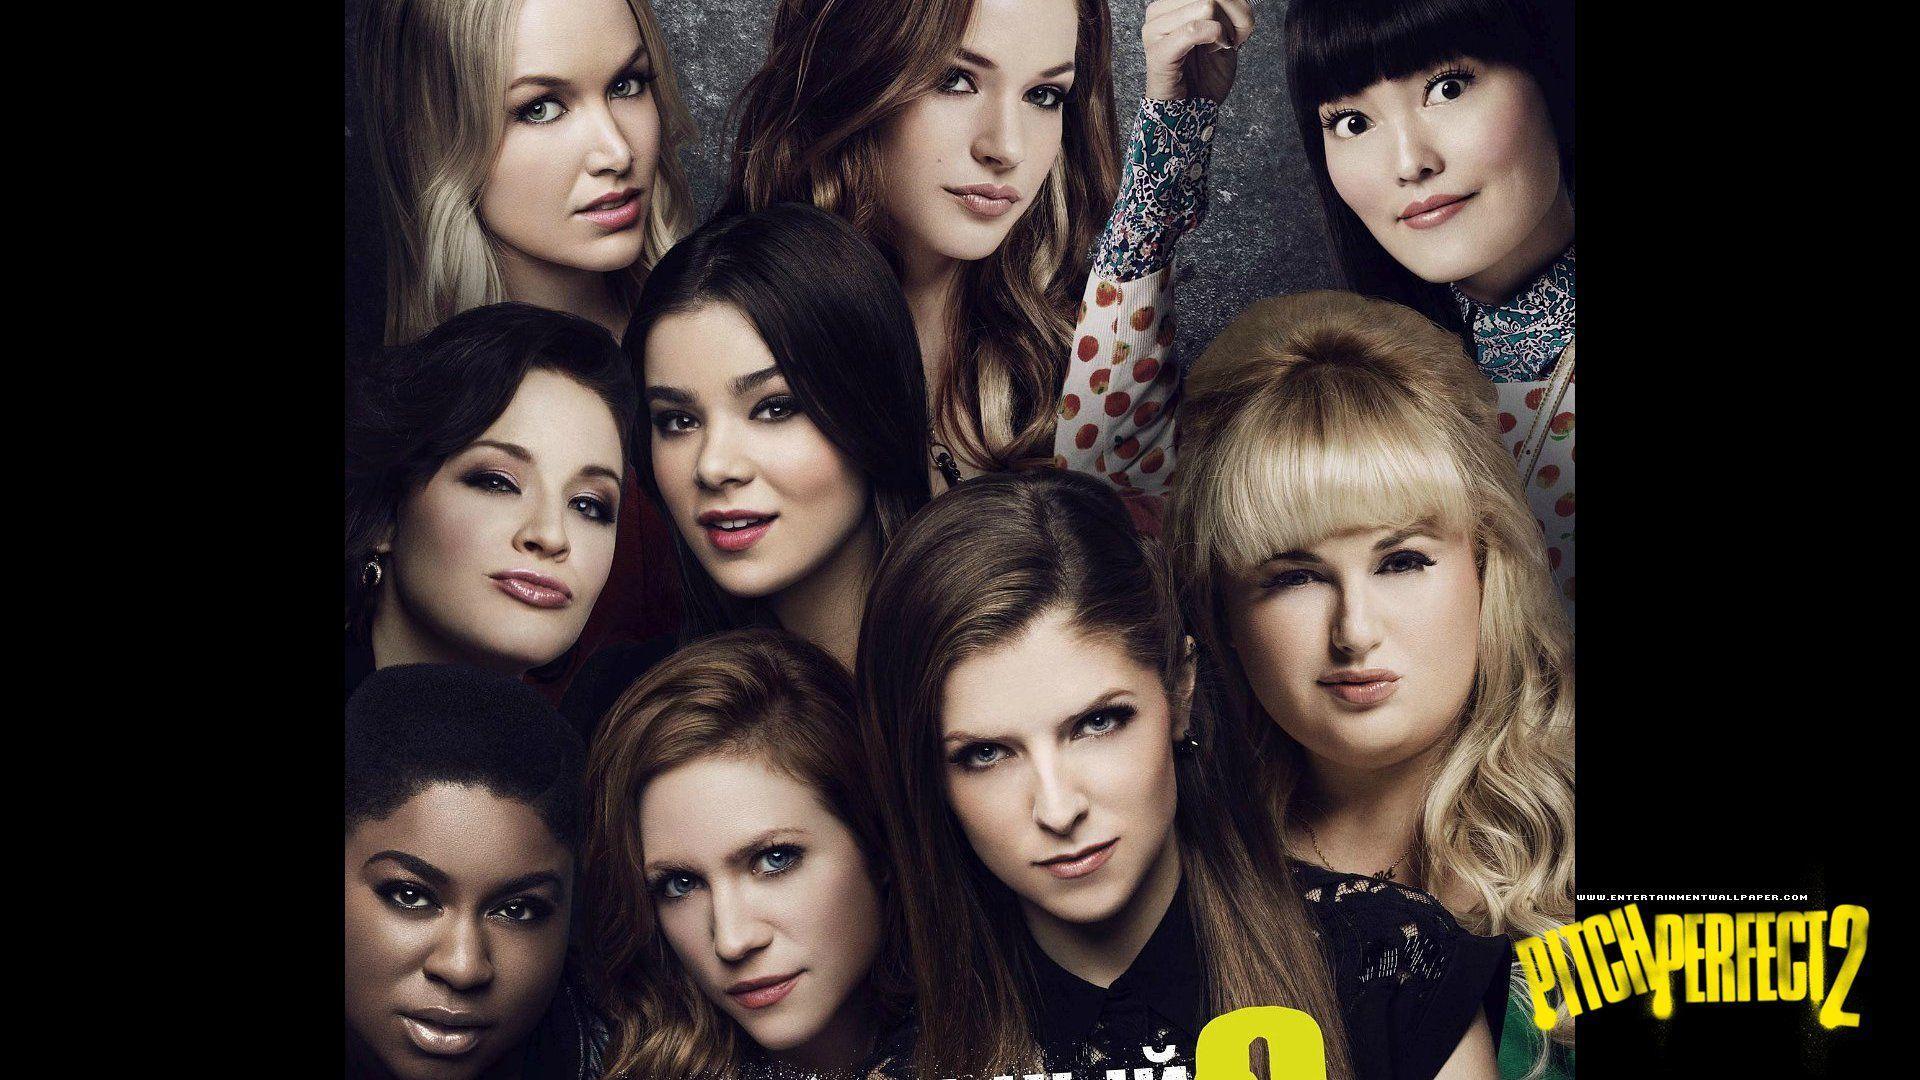 Pitch Perfect Wallpapers